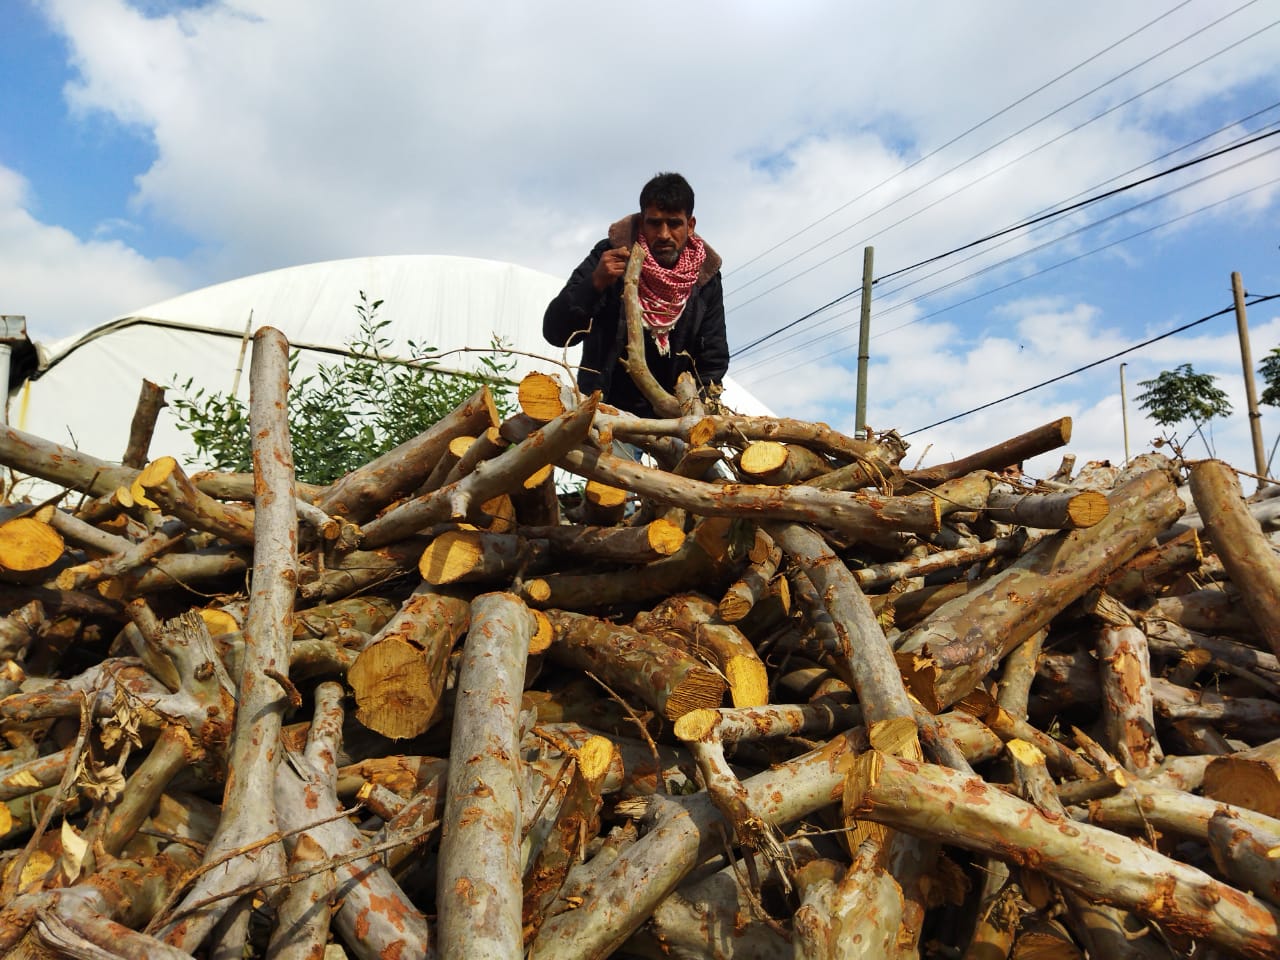 selling wood in Gaza is a mean to earn money